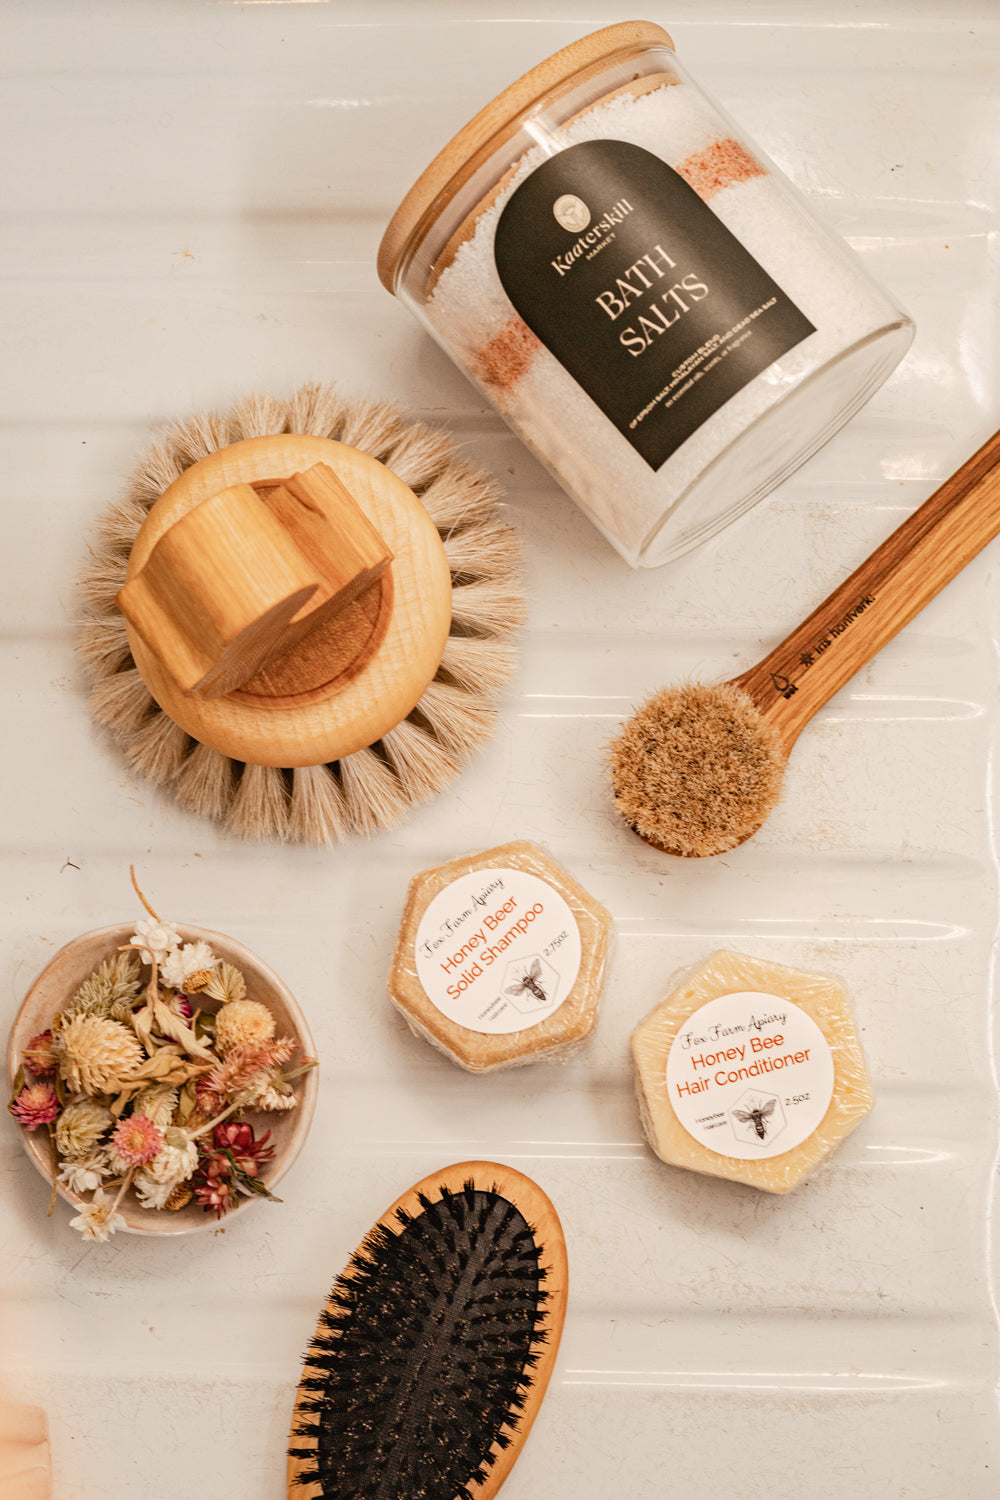 soft face washing brush made of horsehair and oak wood handle shown with bath salts, bar shampoo and conditioner, duck bath brush, and boar bristle hair brush